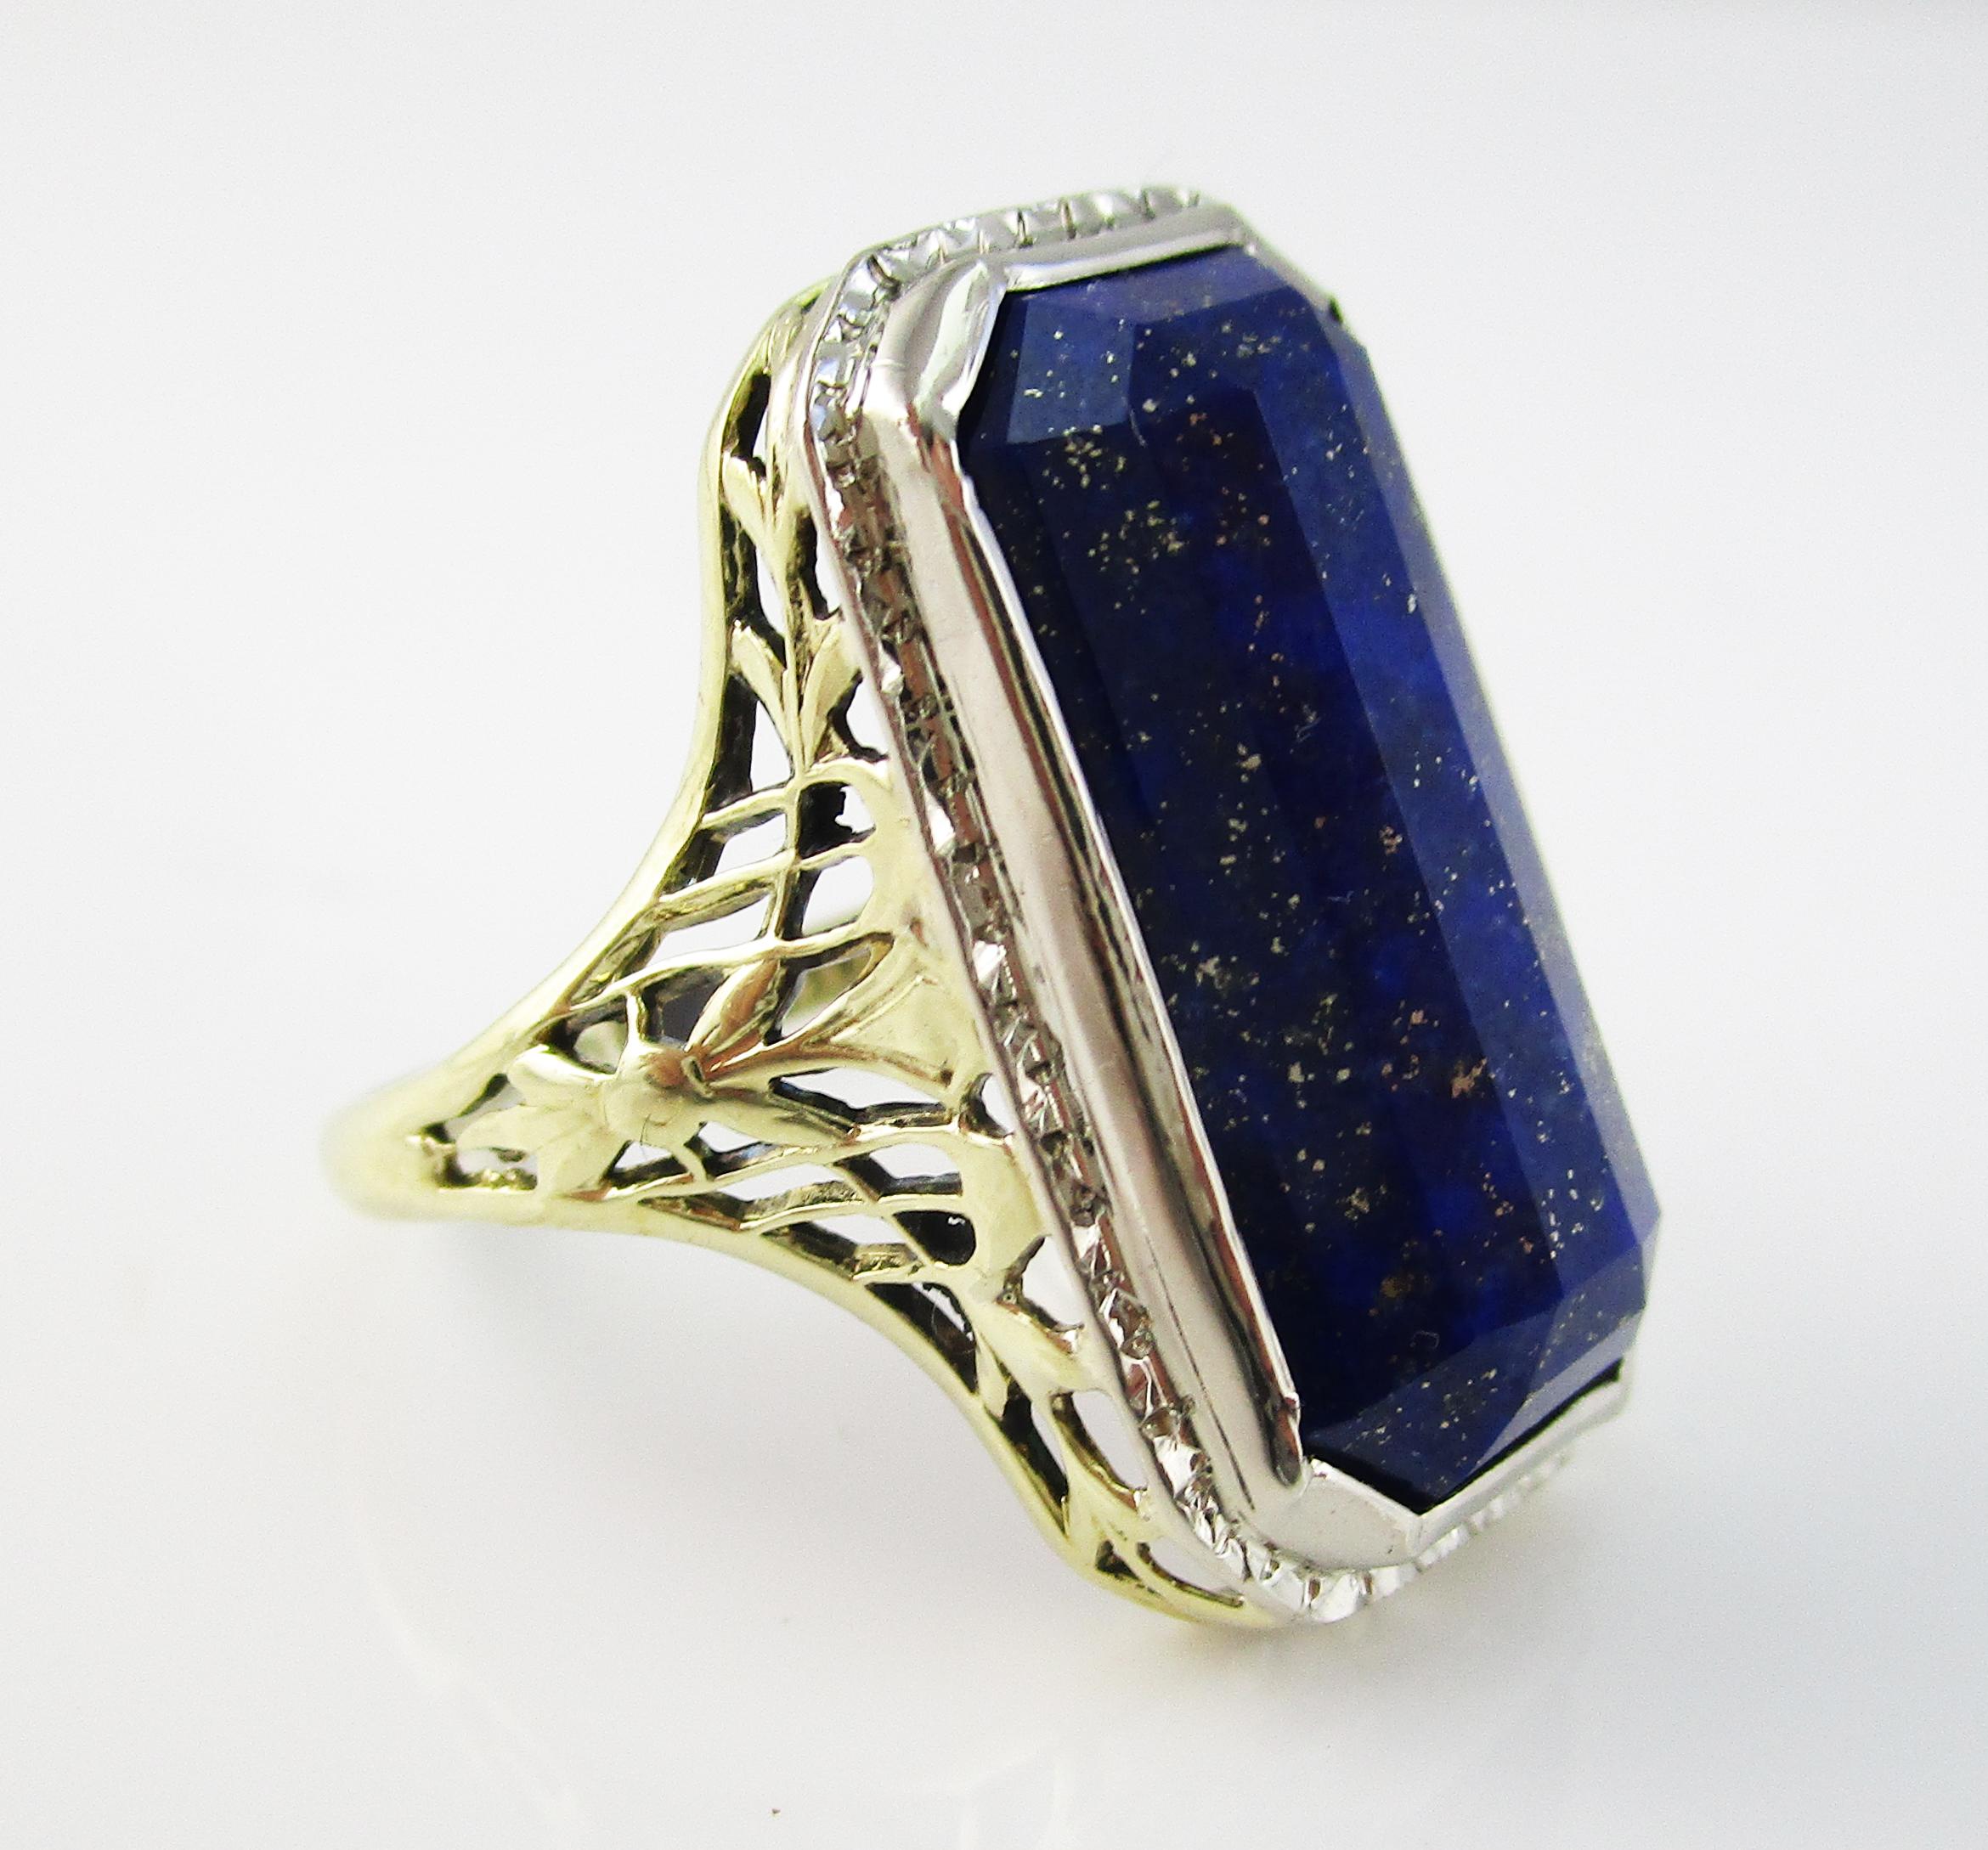 Emerald Cut Edwardian 14K White and Green Gold Filigree Faceted Blue Lapis Statement Ring